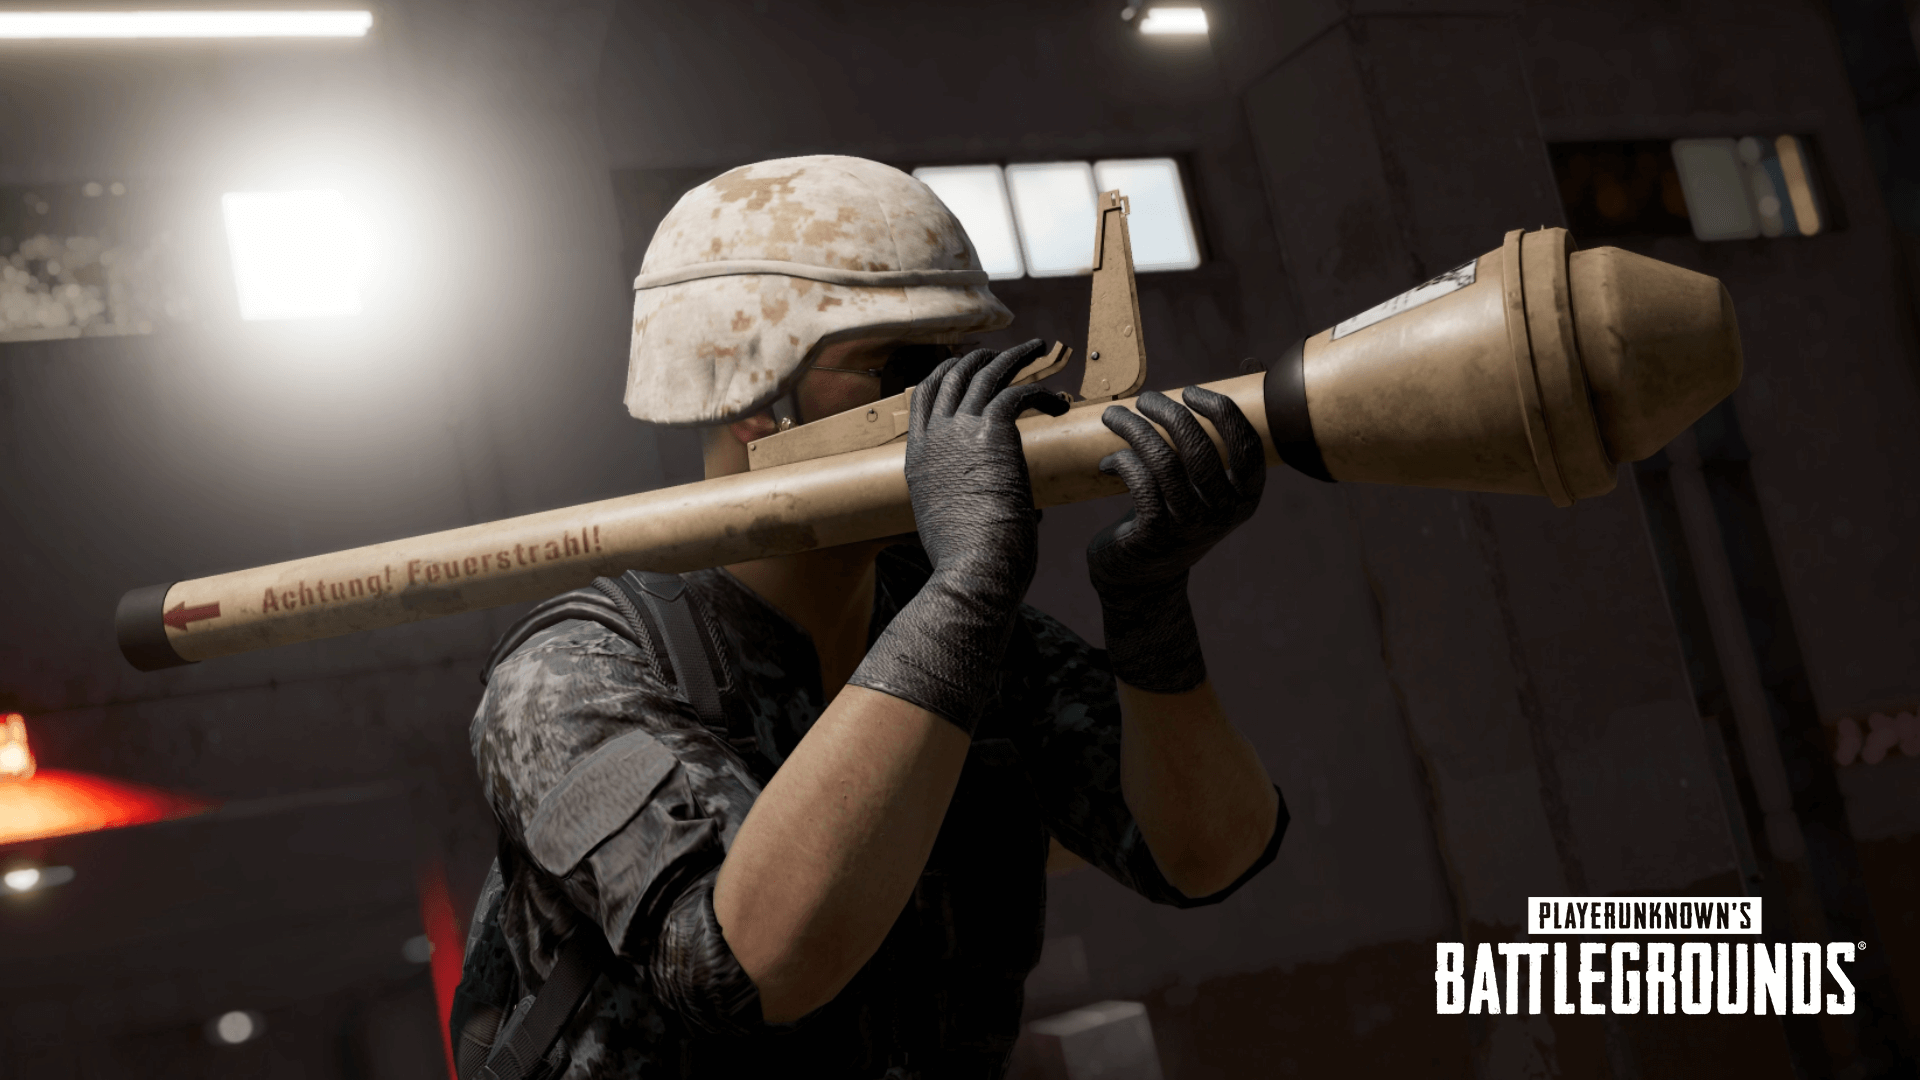 PUBG Update 6.3 Brings Panzerfaust, Weapon Balancing, and More